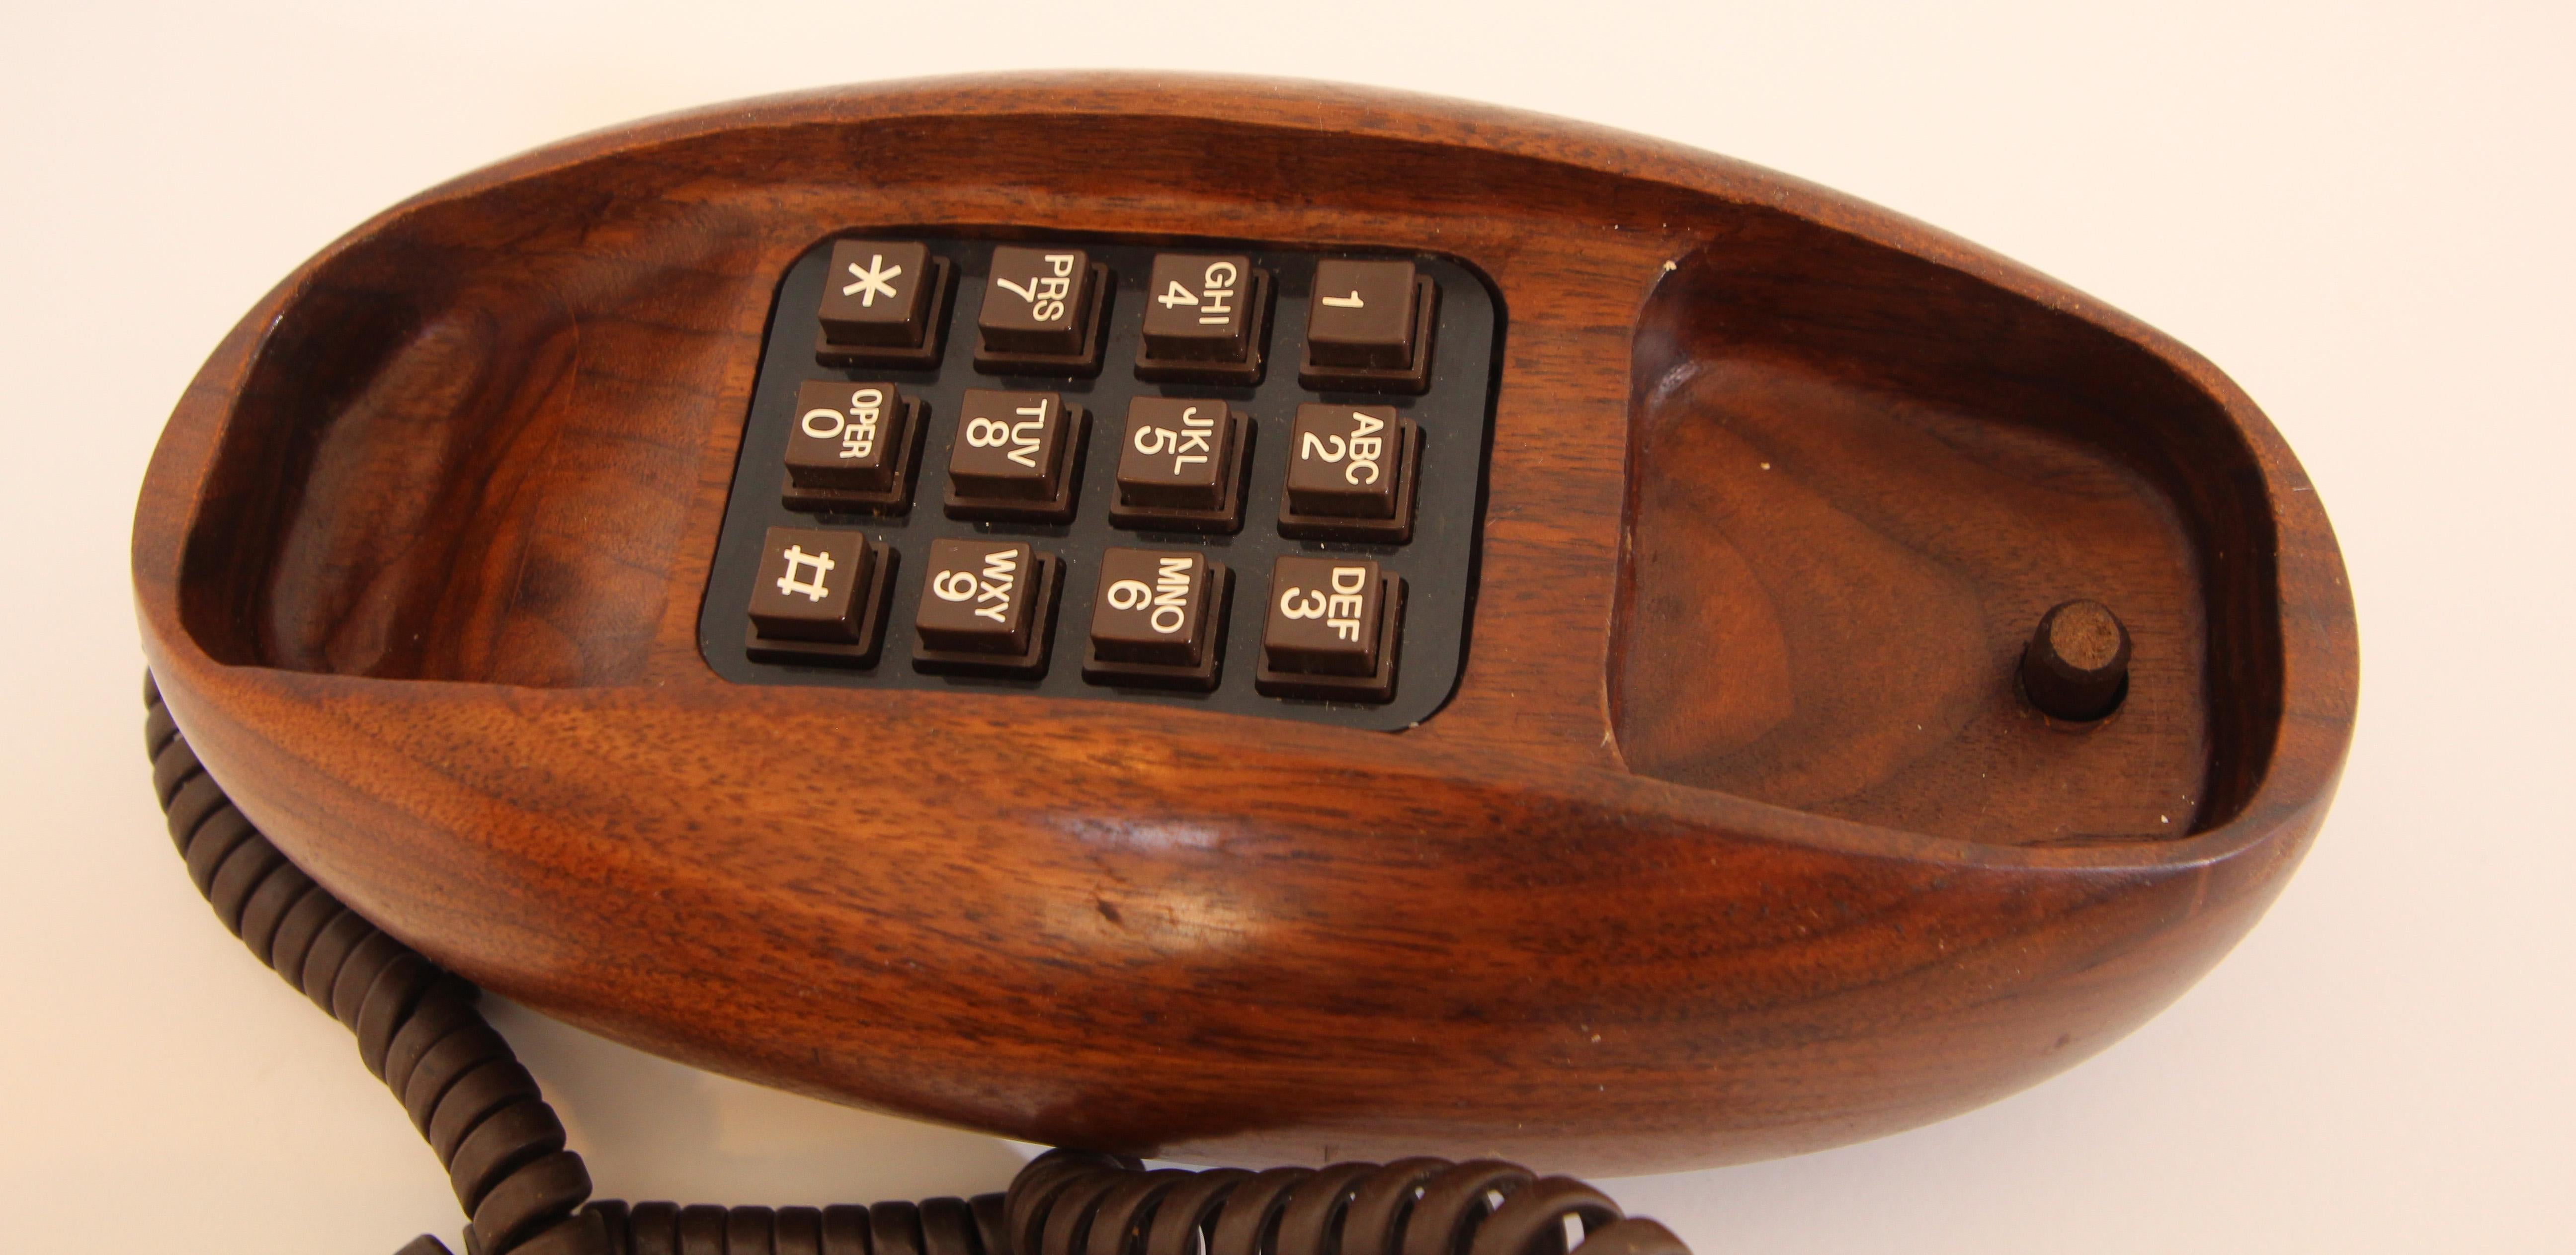 20th Century Vintage Telephone Covered in Wood, Organic Modern Style Retro Phone